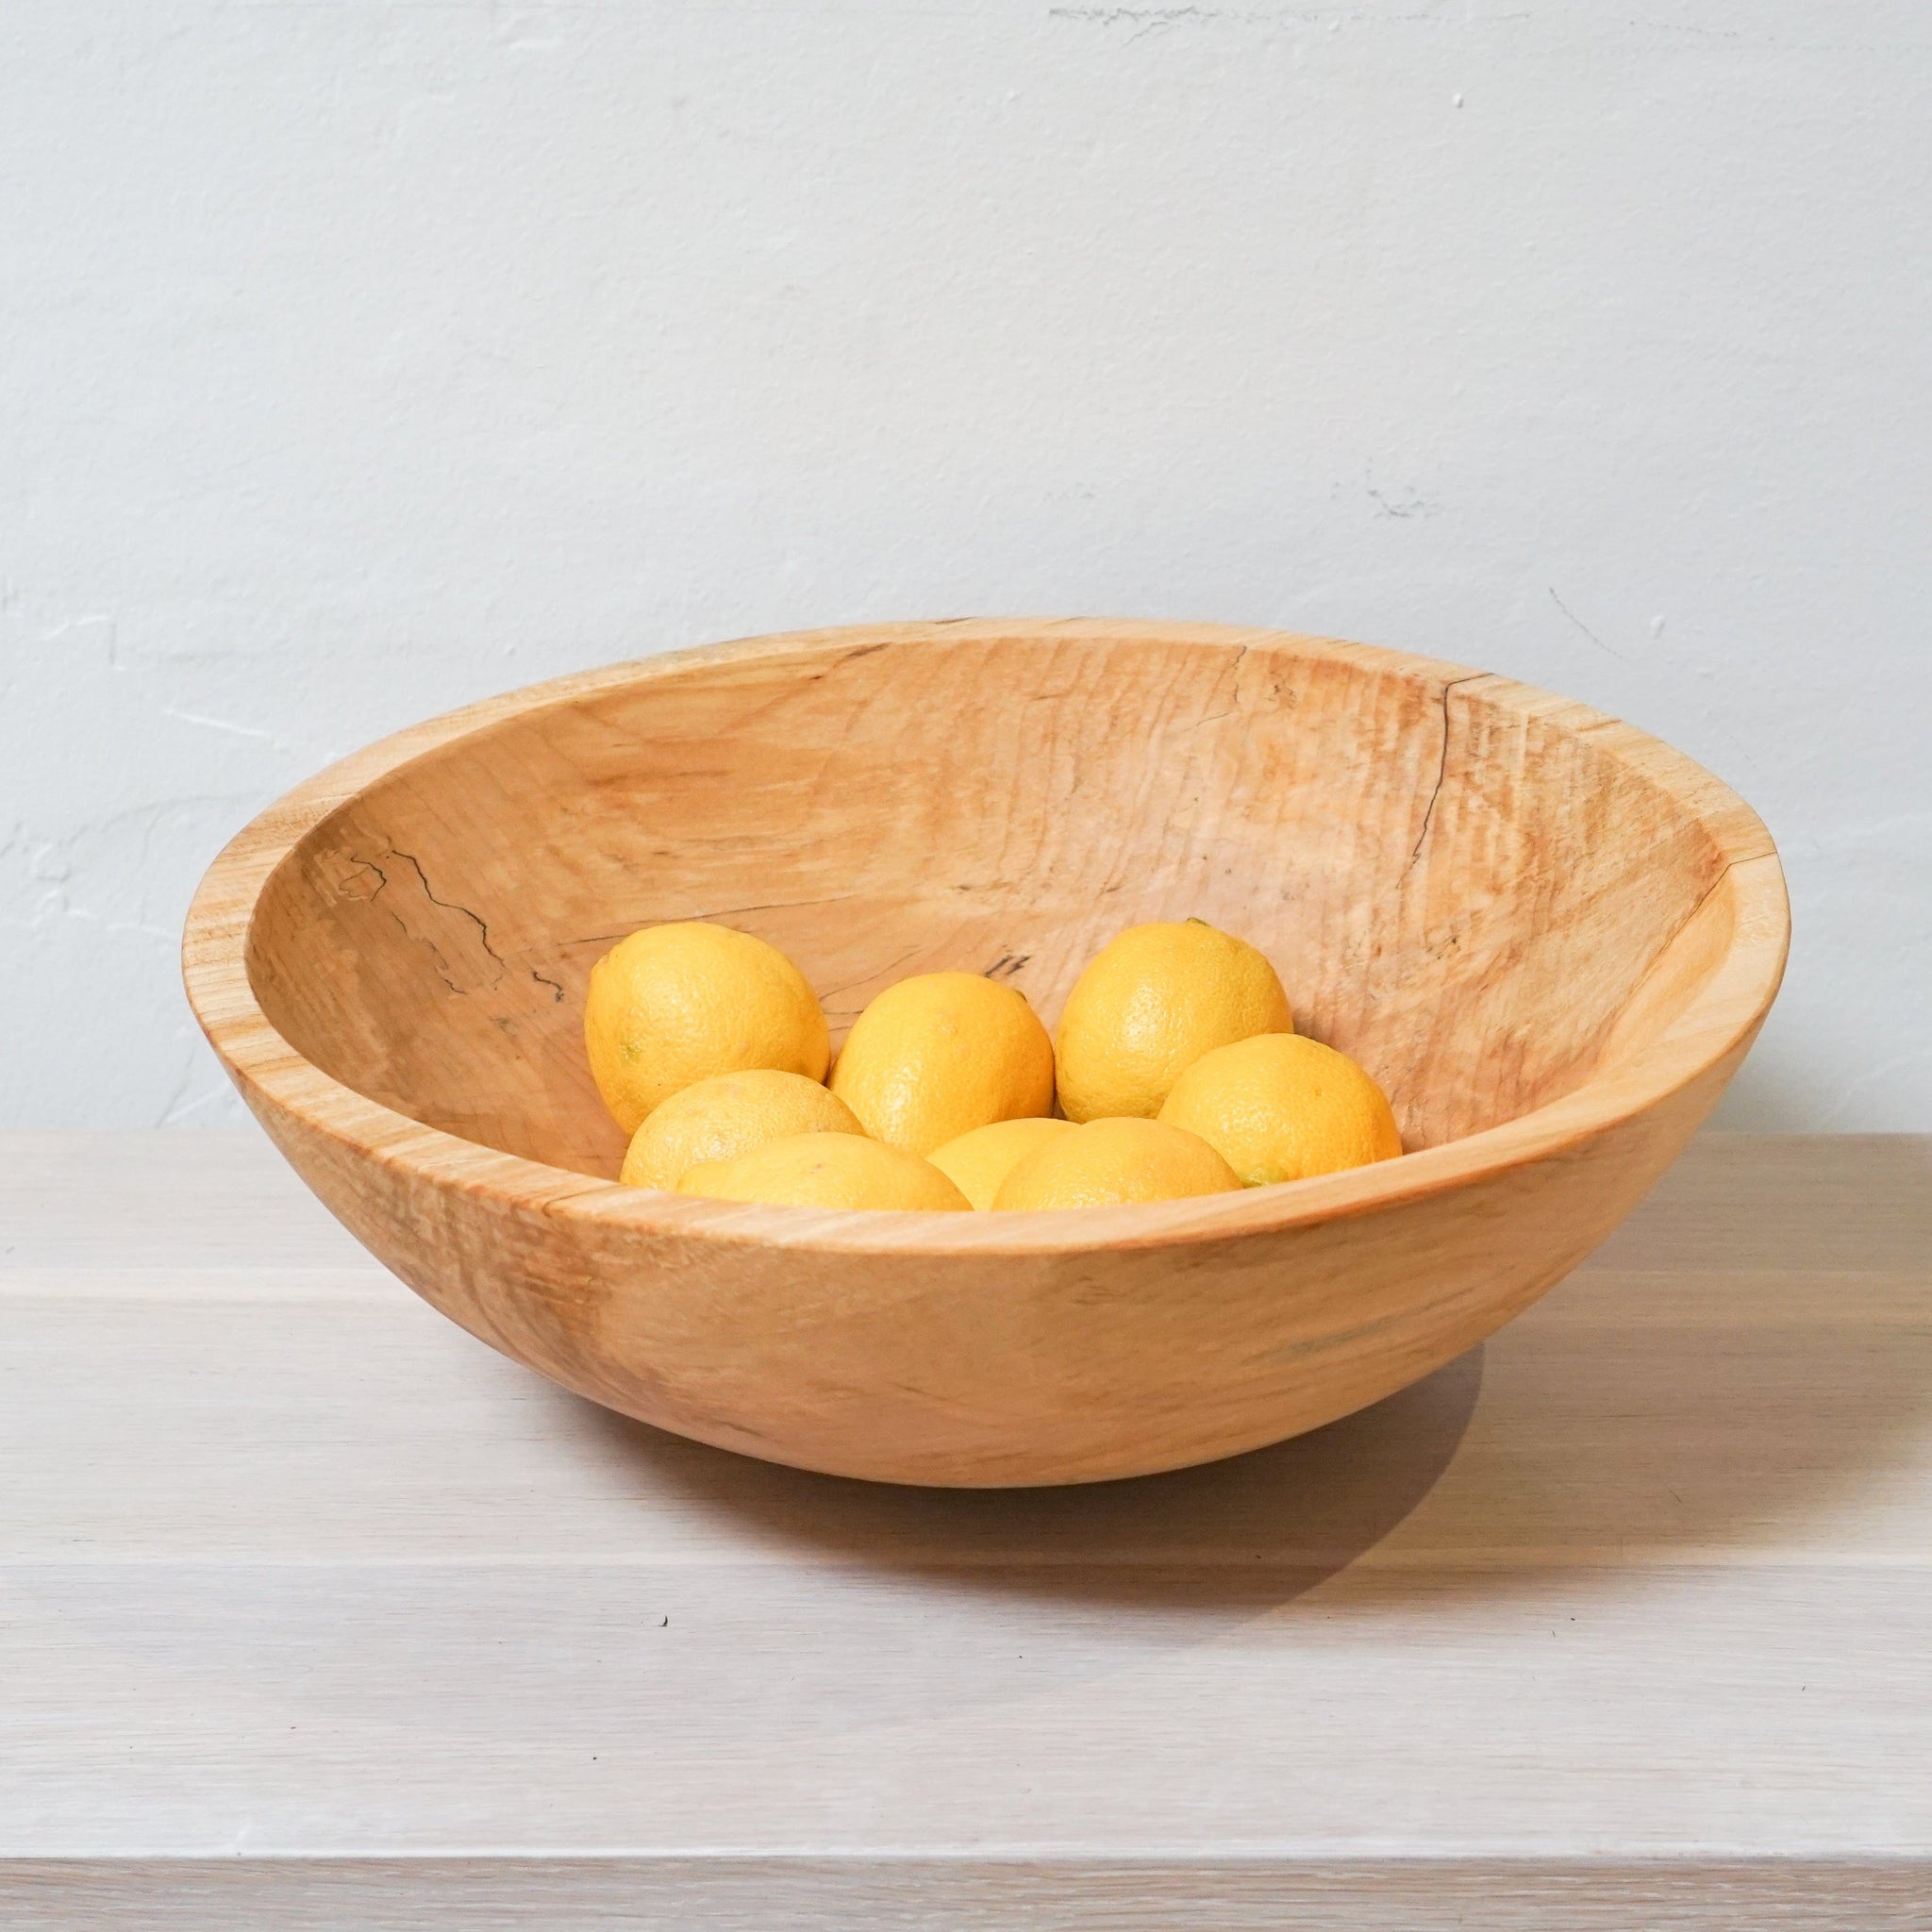 Spencer Peterman Bowls Spalted Maple Round Salad Bowl - 15"